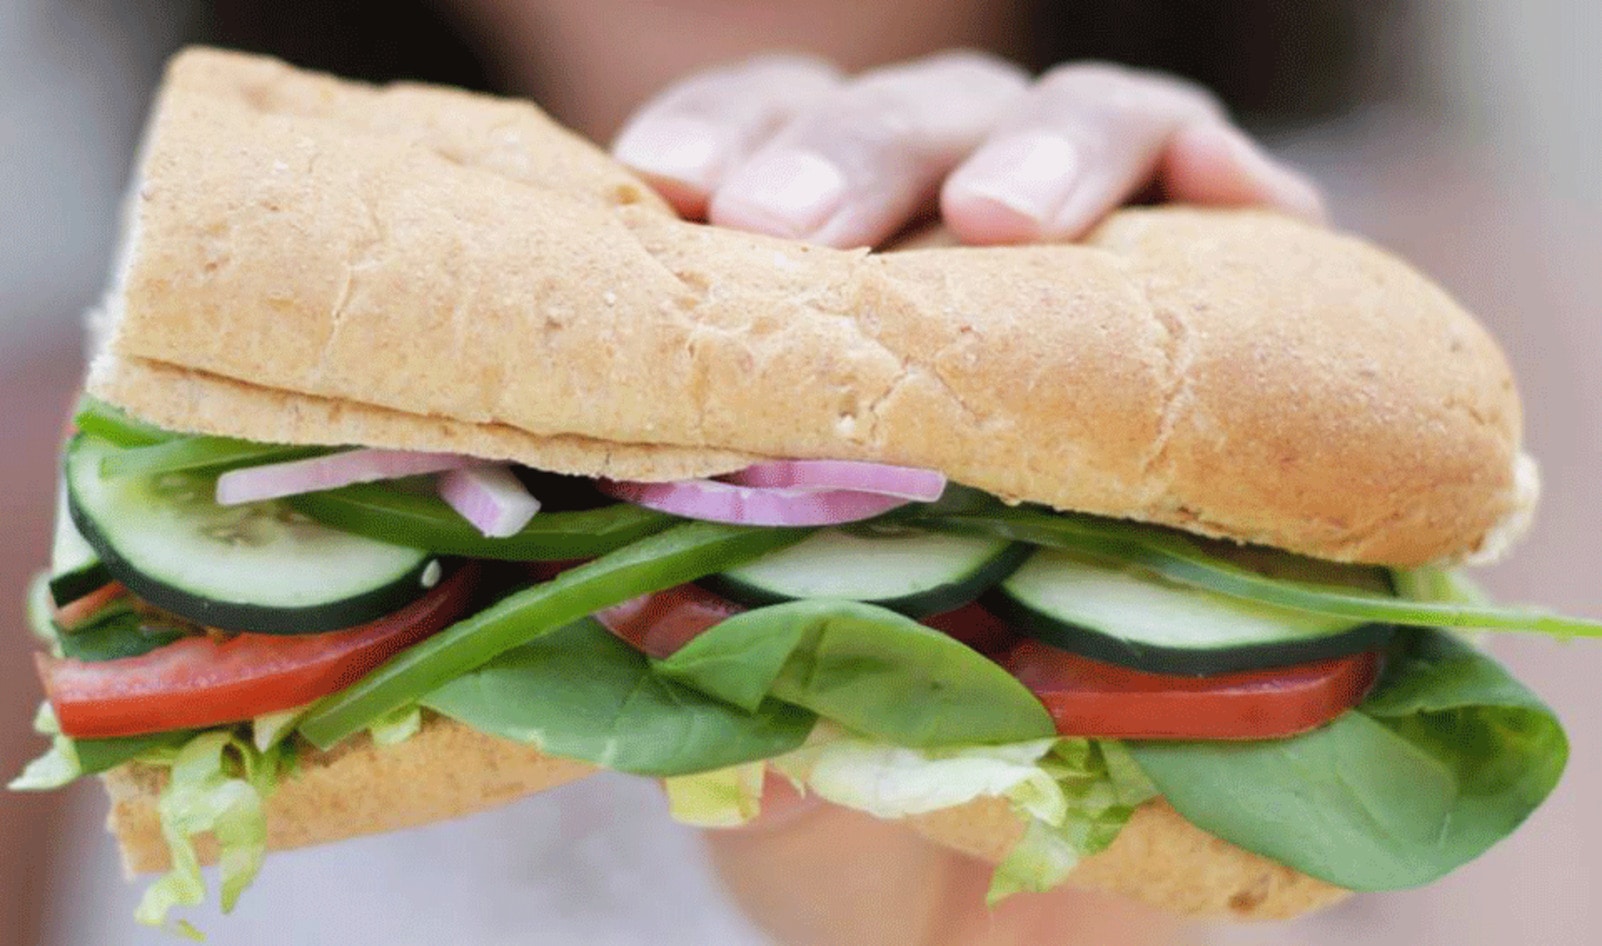 200 Subway Locations in Netherlands to Push Vegan Options During Meat-Free Week